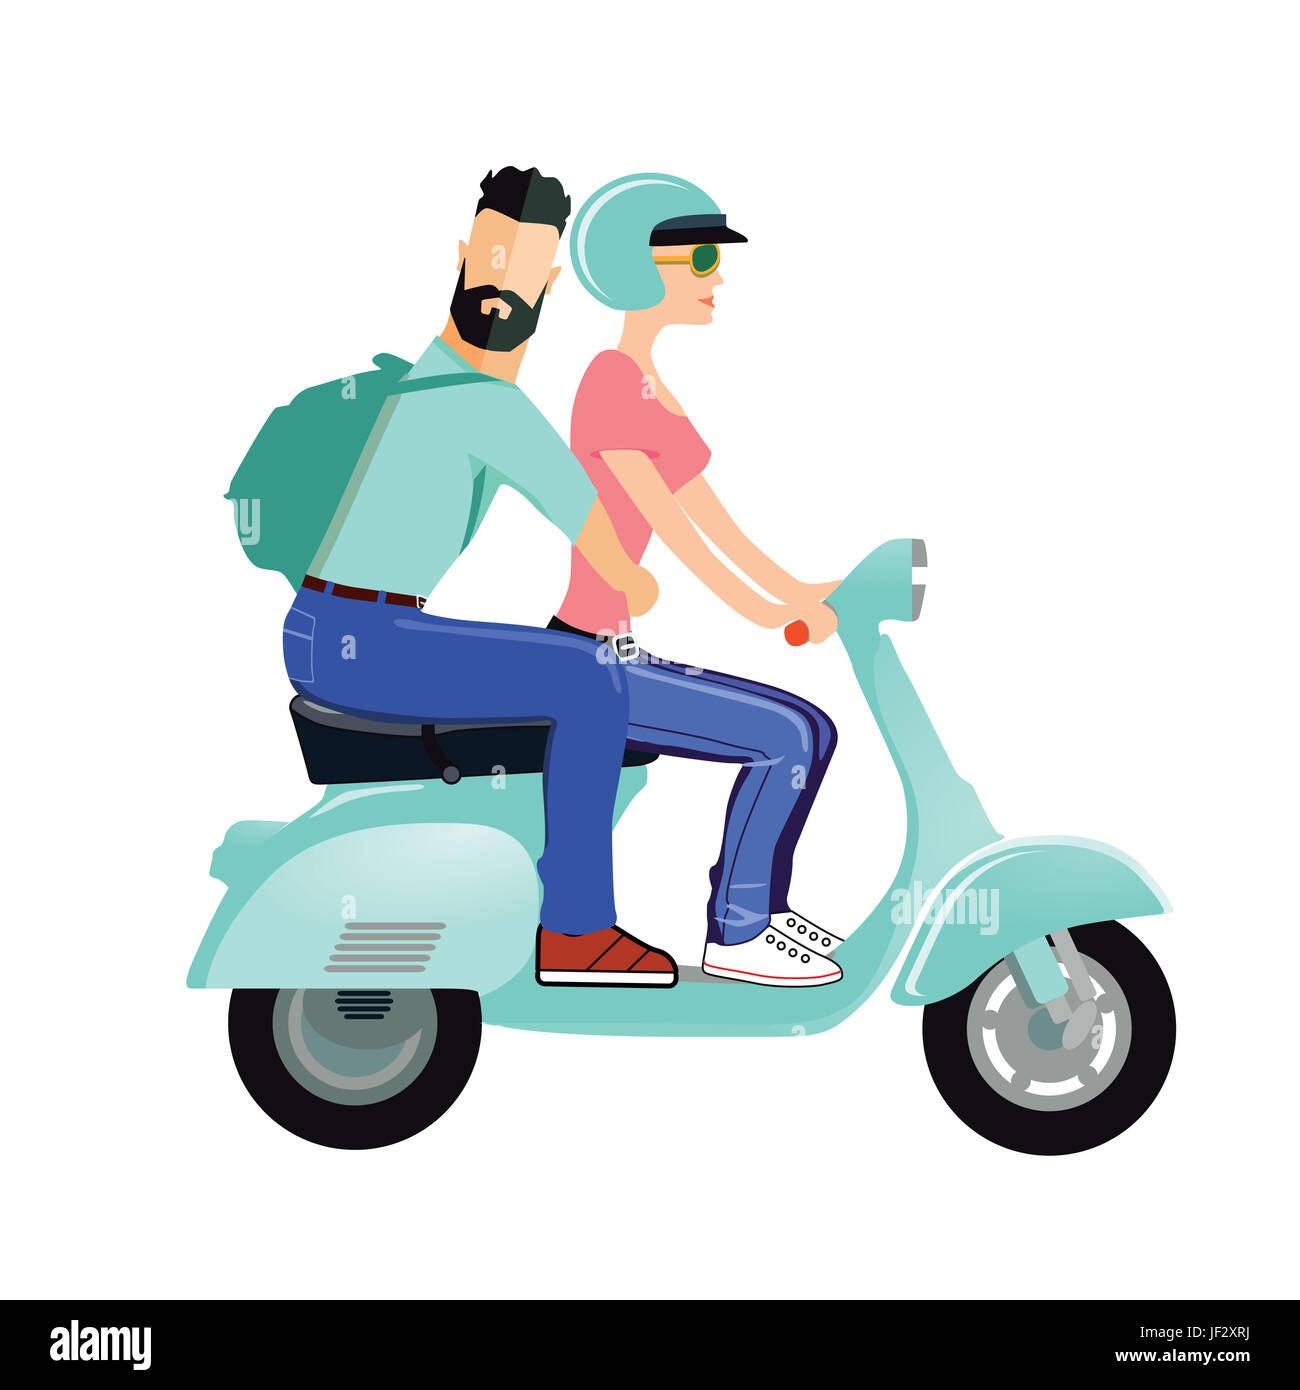 A man and a woman are riding a scooter Stock Photo